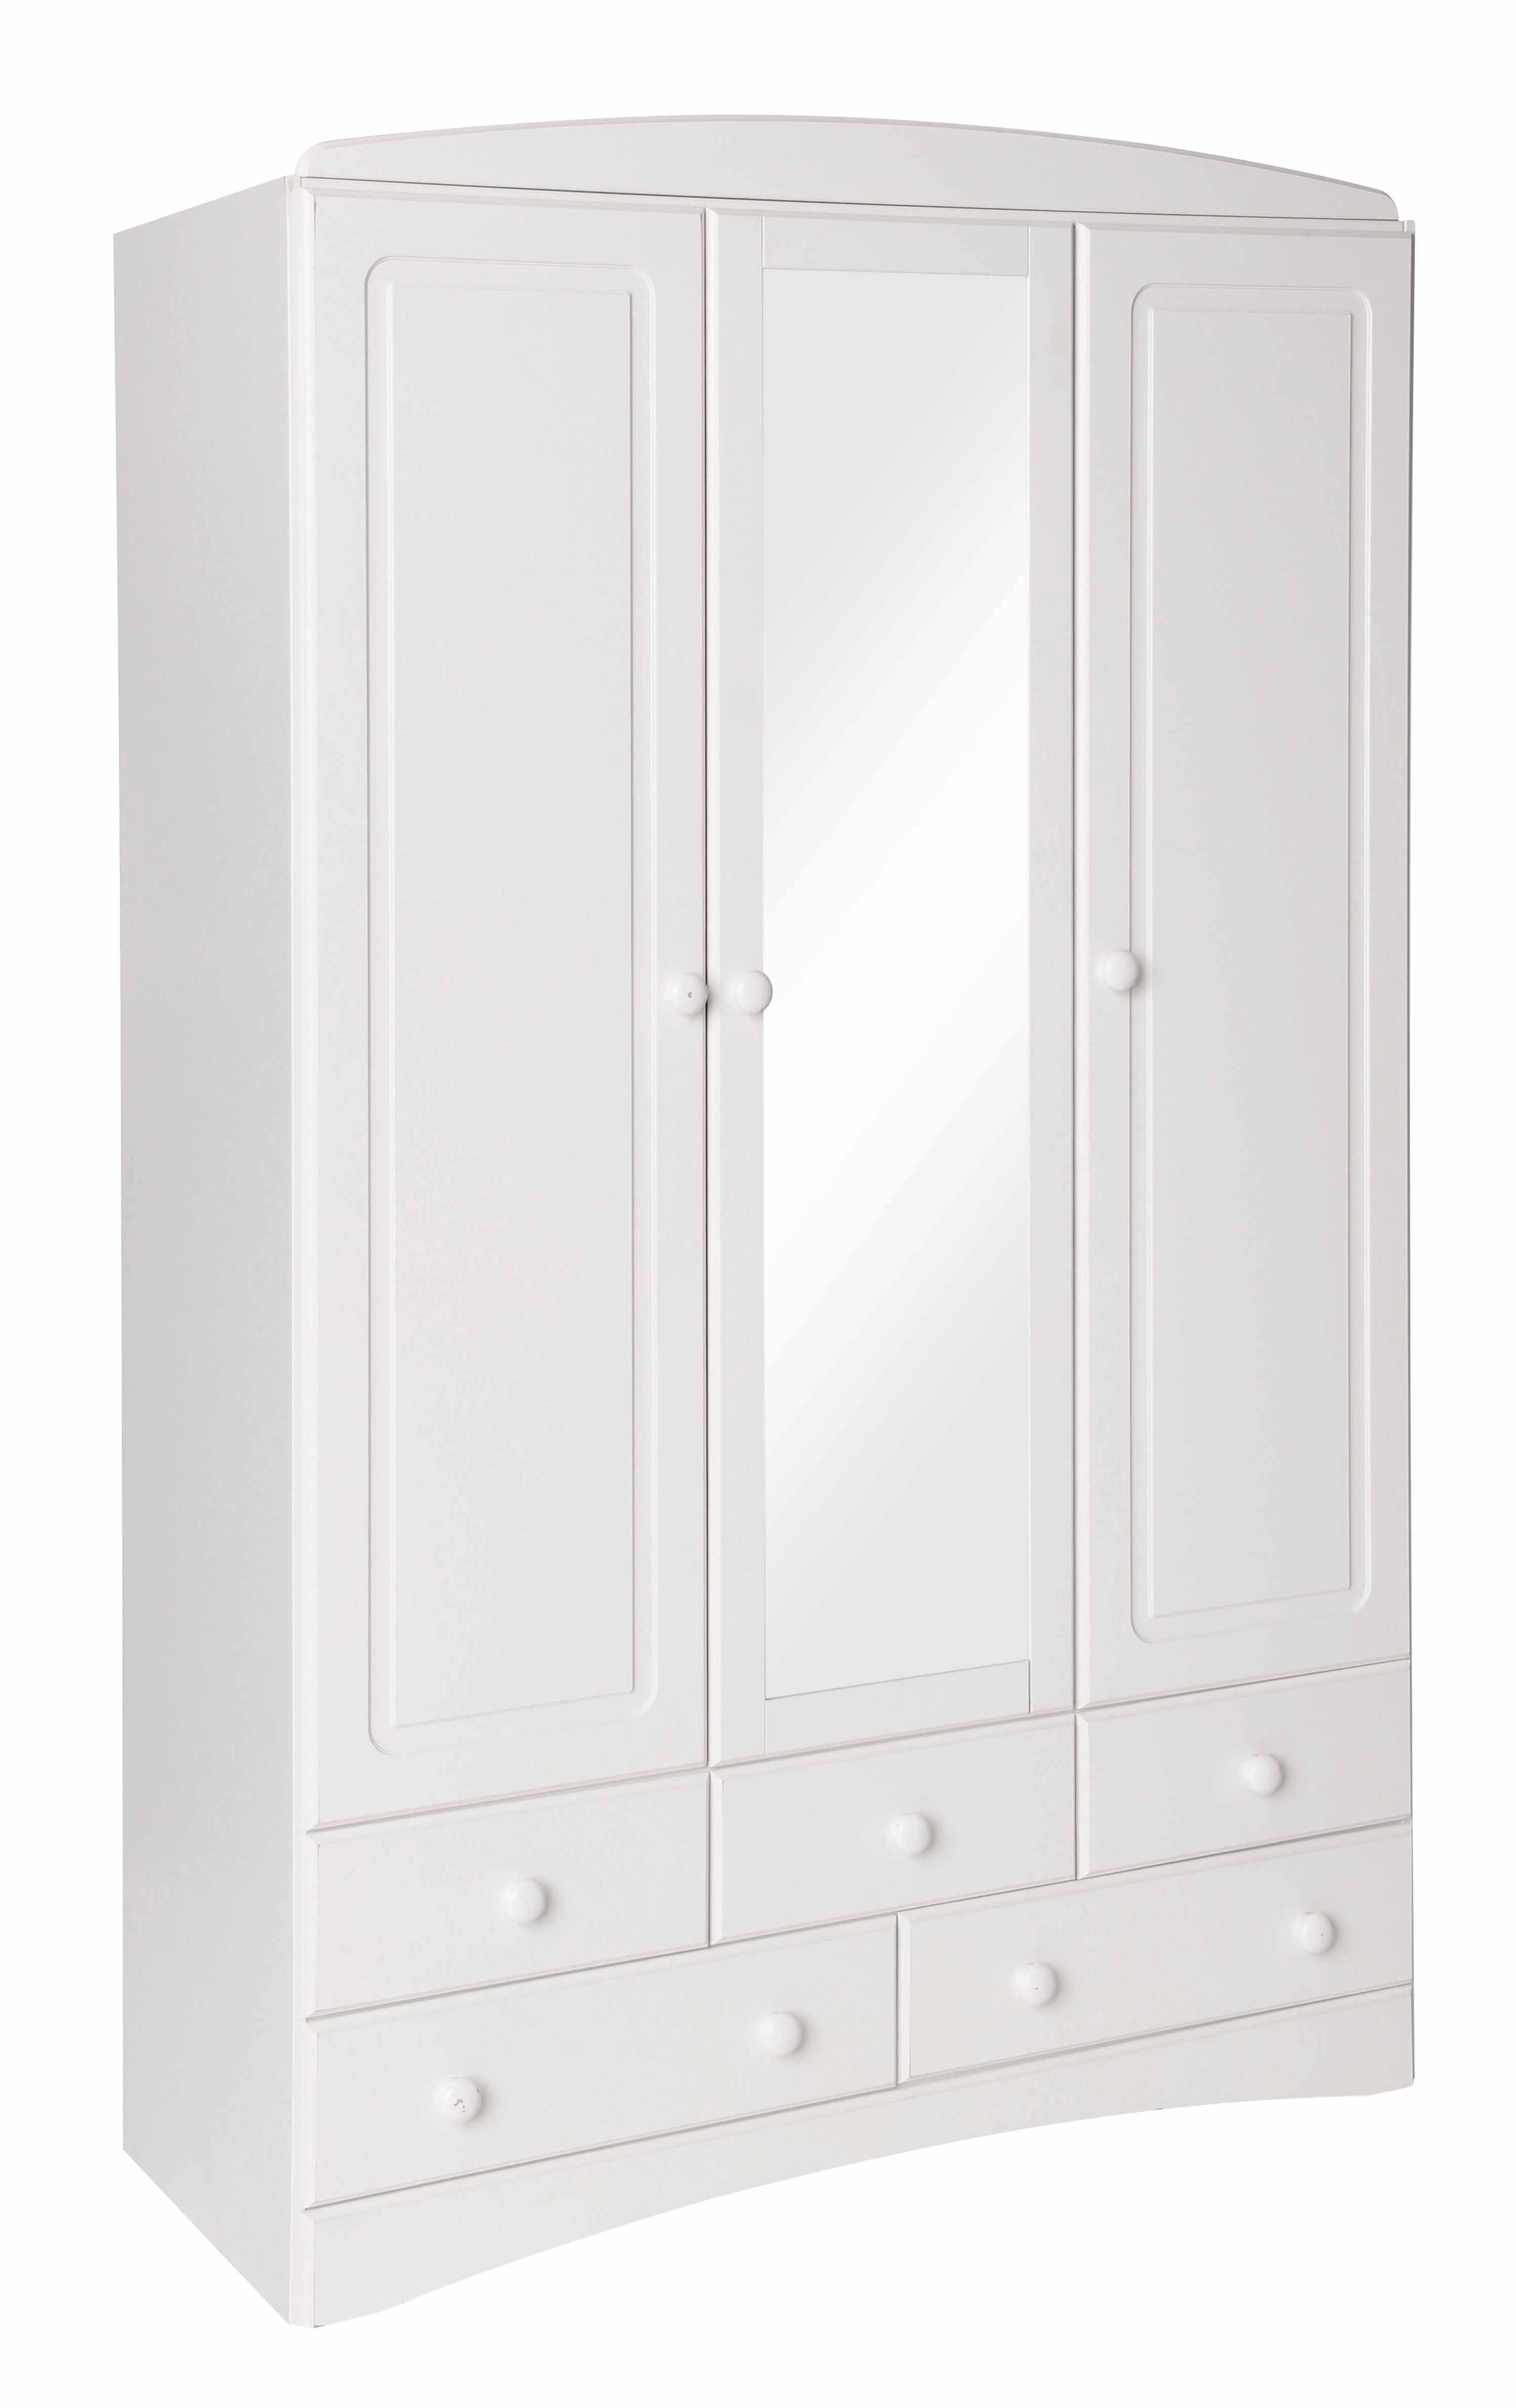 Featured Photo of 3 Door White Wardrobes With Drawers